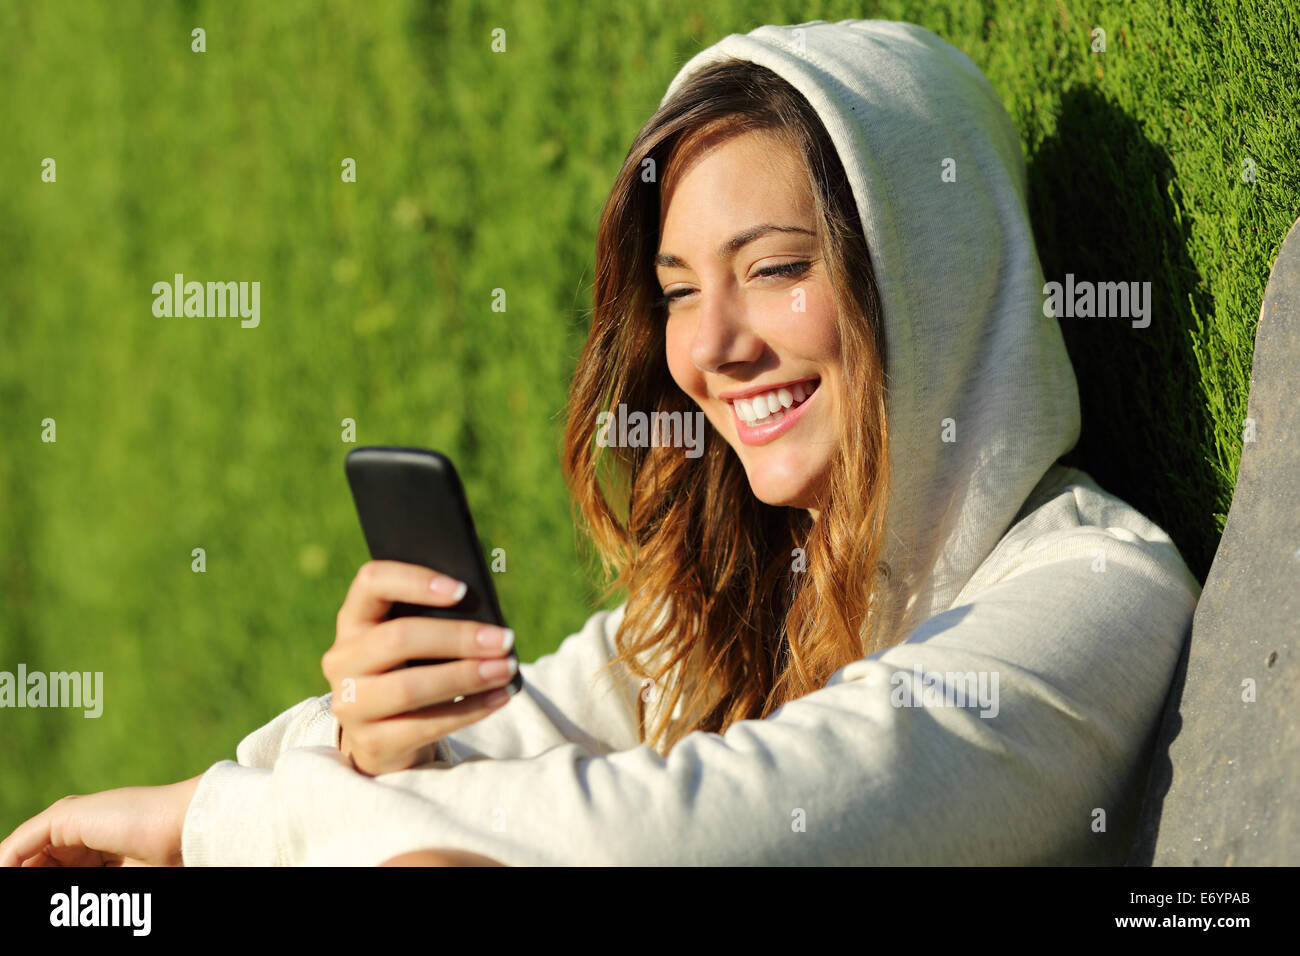 Modern teenager girl using a smart phone in a park with a green background Stock Photo